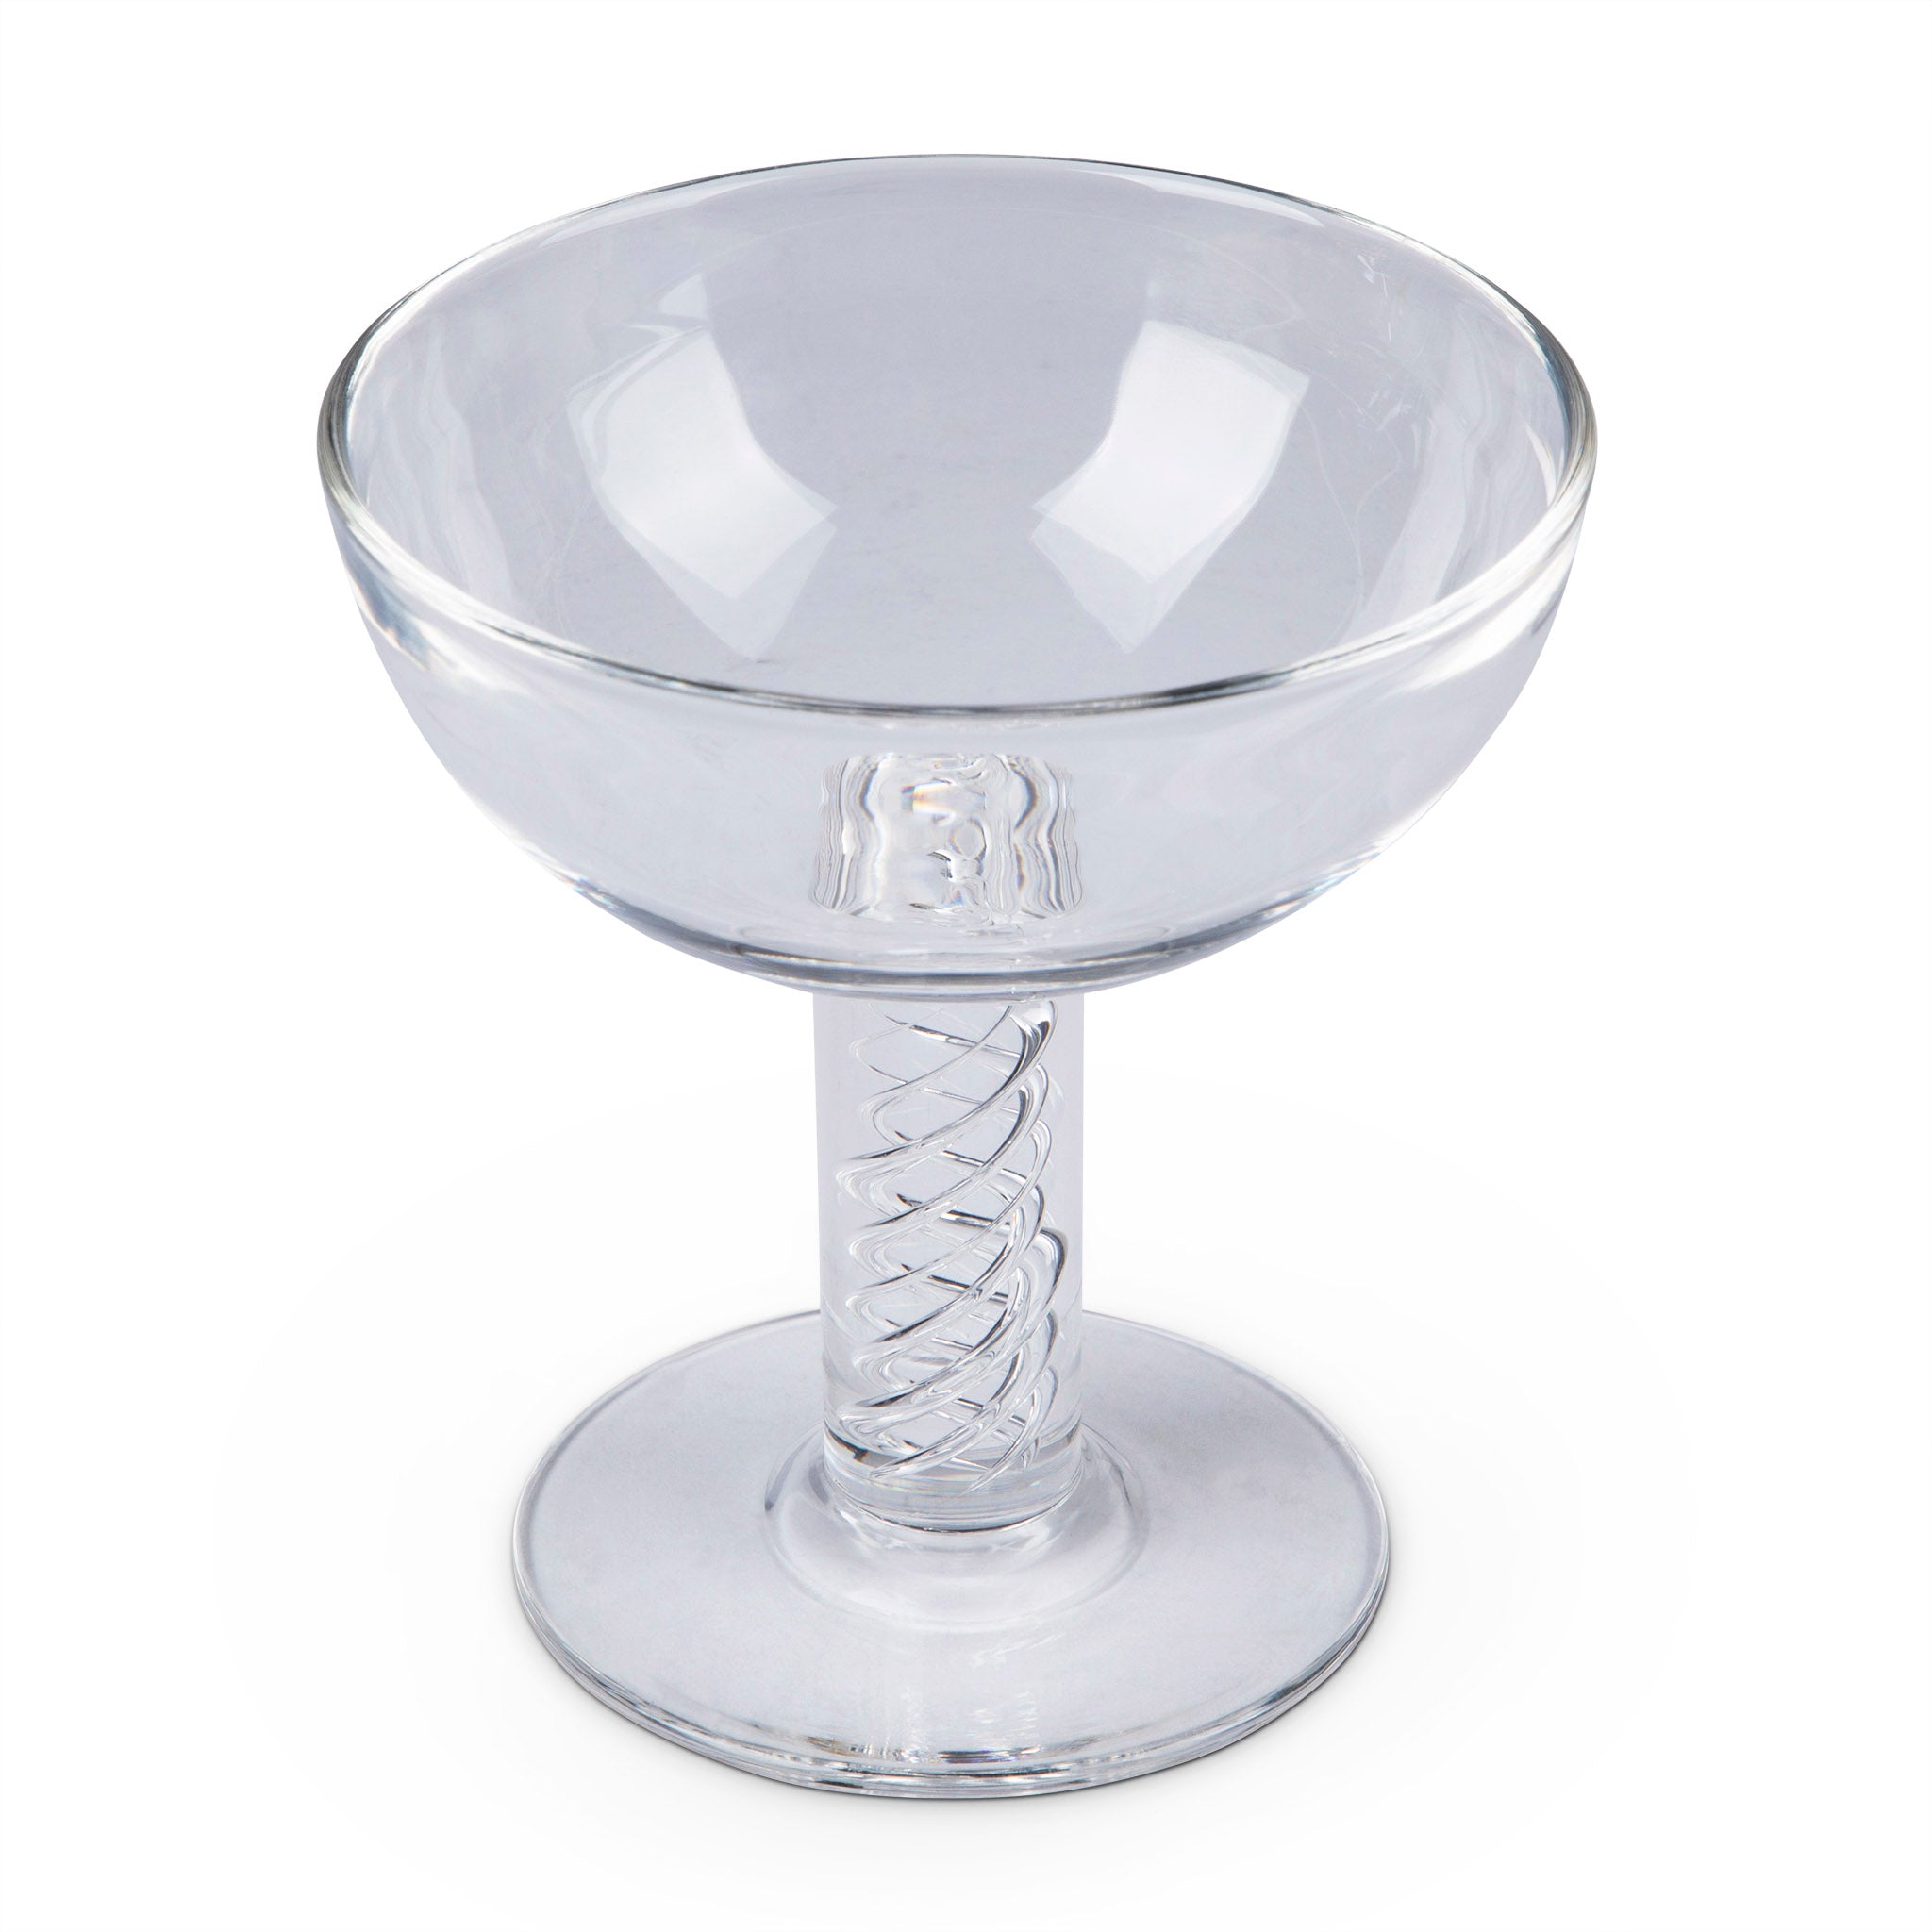 Steuben Crystal Air Twist Champagne Coupe Goblet